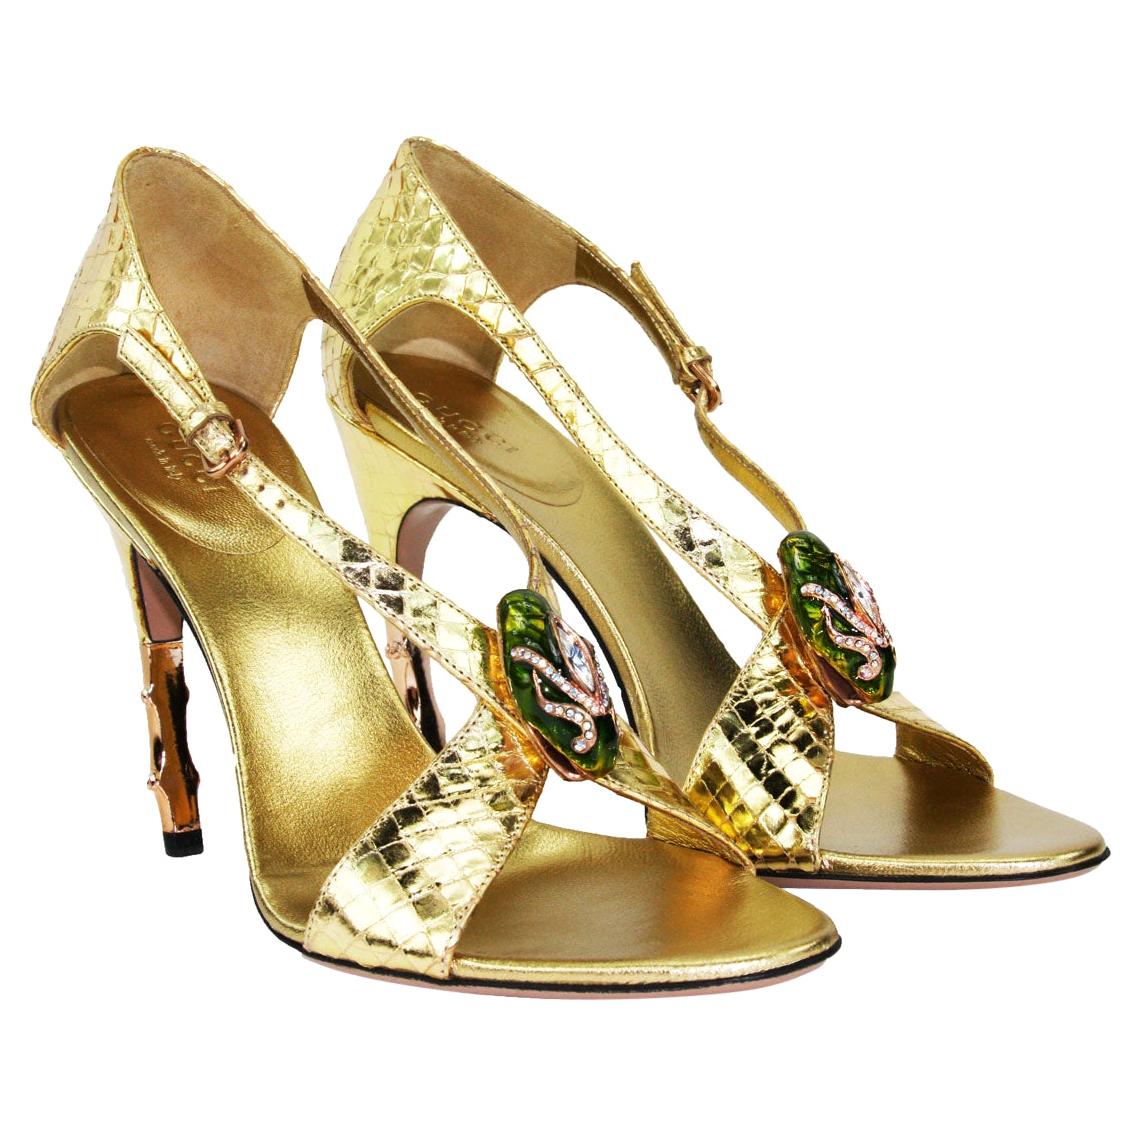 New Tom Ford for Gucci S/S 2004 Gold Python Jeweled Bamboo Heel Shoes 8.5 - 38.5